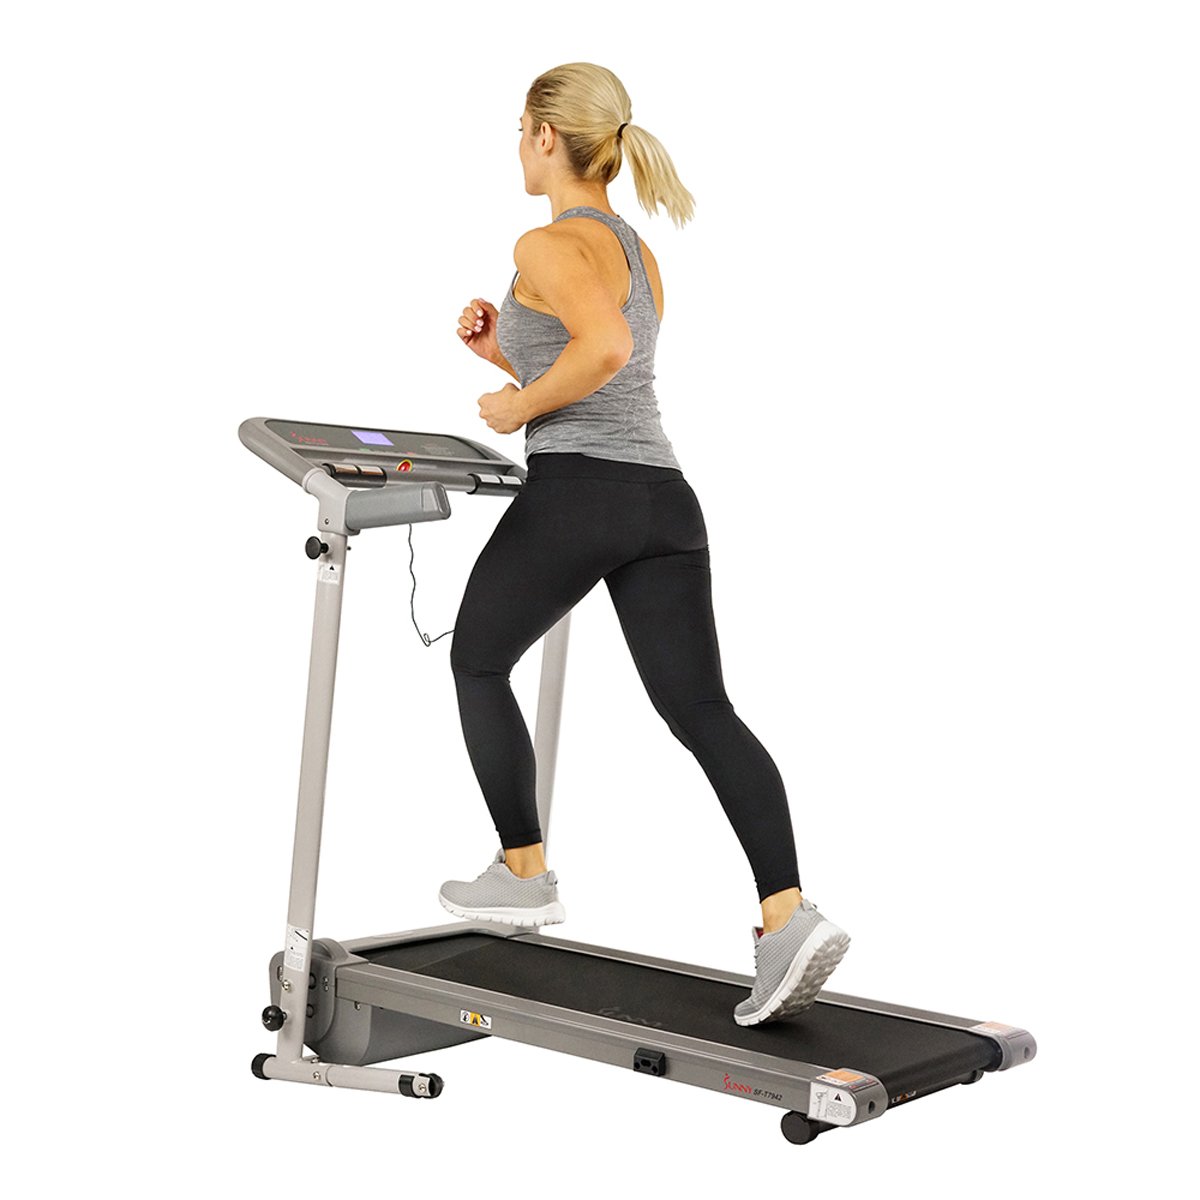 Sunny Health & Fitness Fixed Incline, Foldable Home Gym Walking Treadmill, 220 lb Max Weight, 1.25 HP - SF-T7942 - image 1 of 10